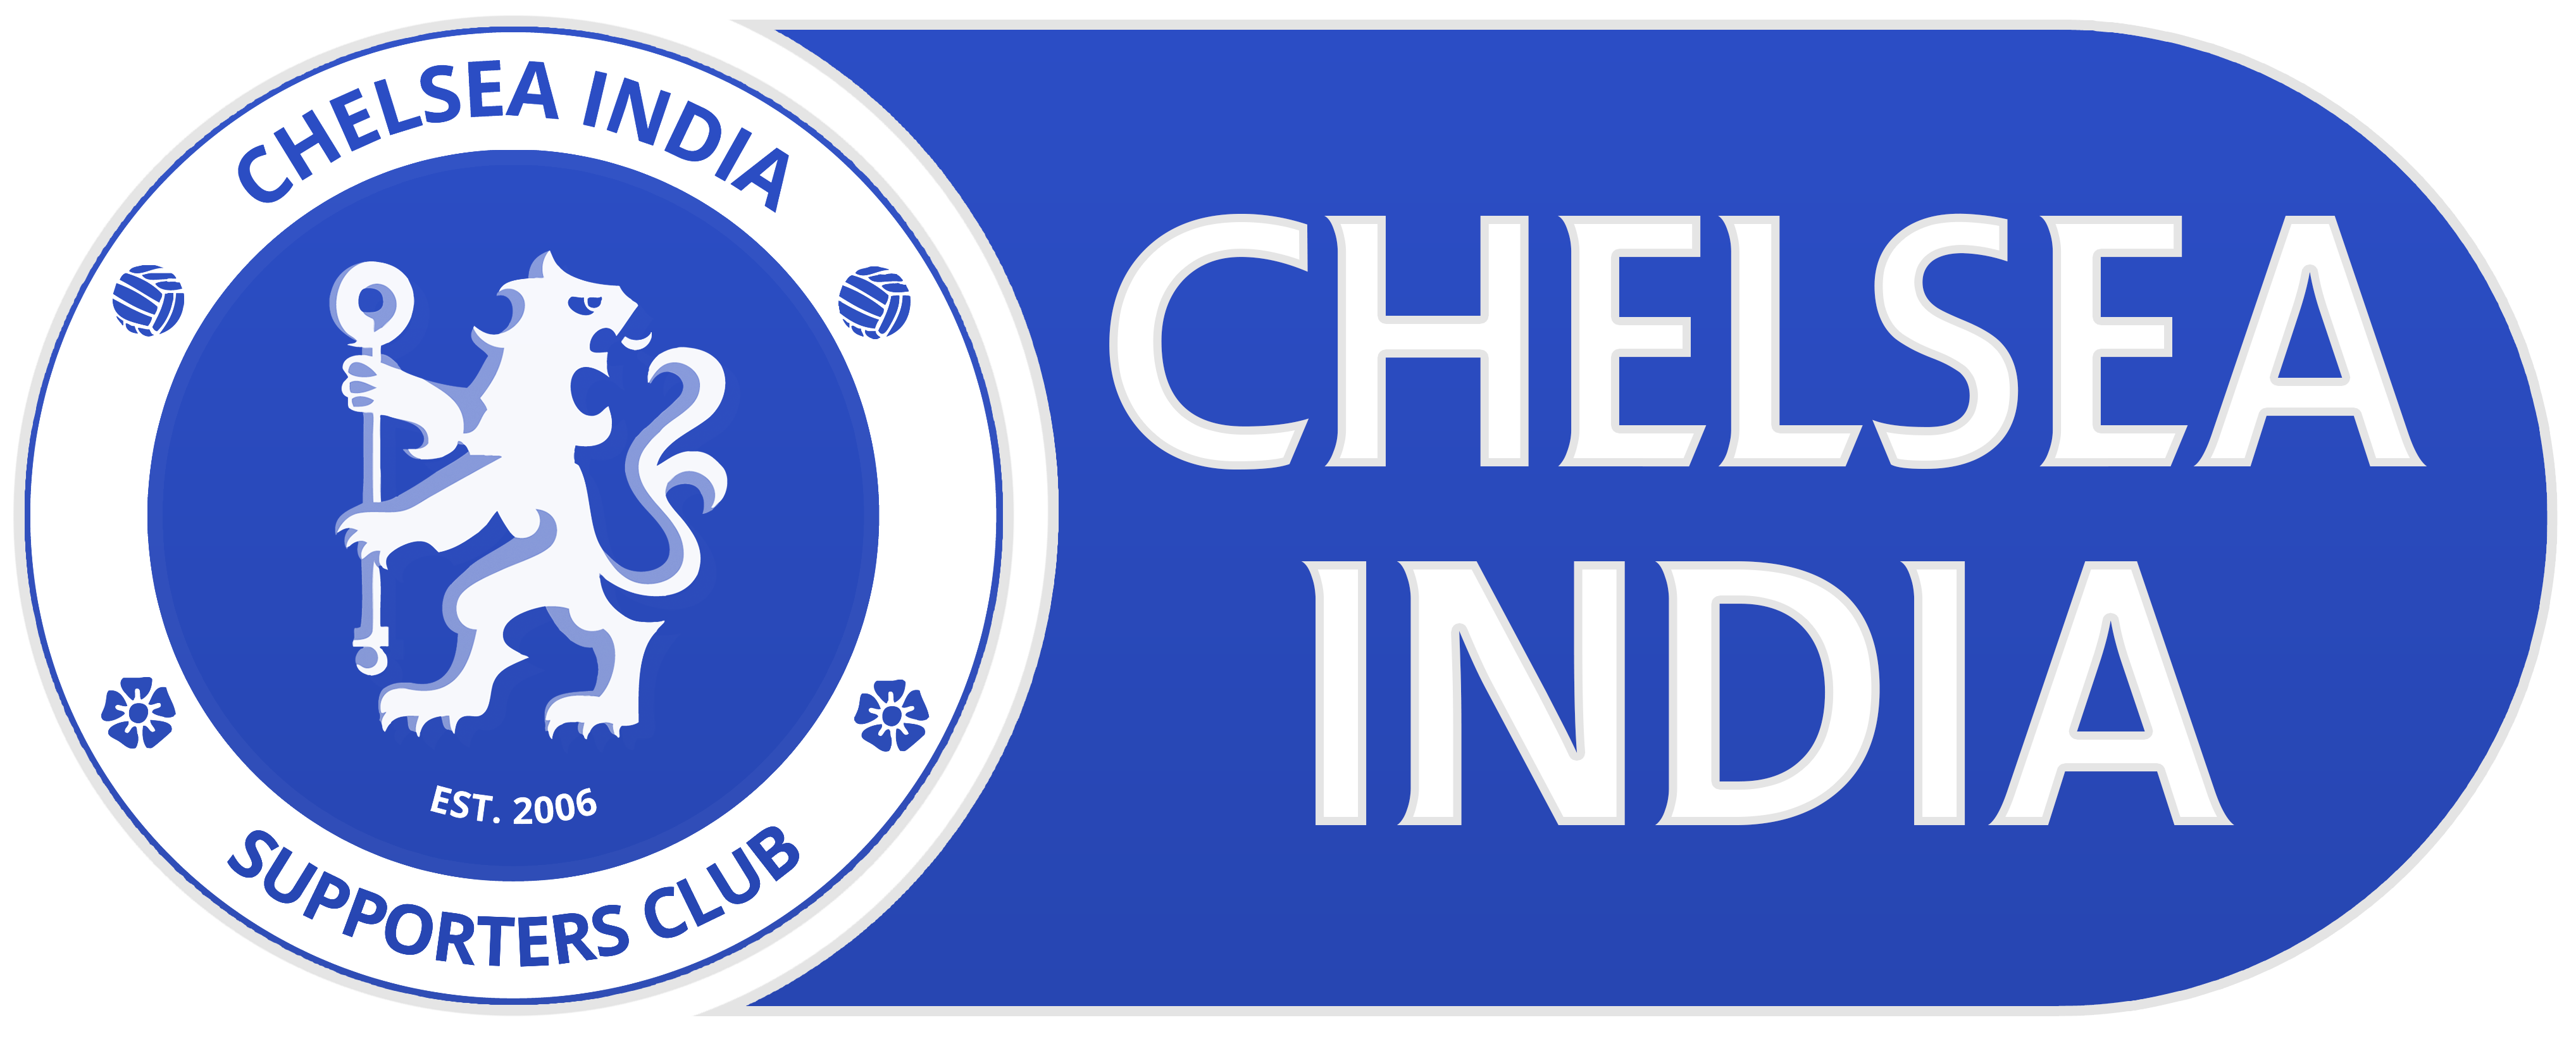 logo chelsea, home chelsea india supporters club 28392